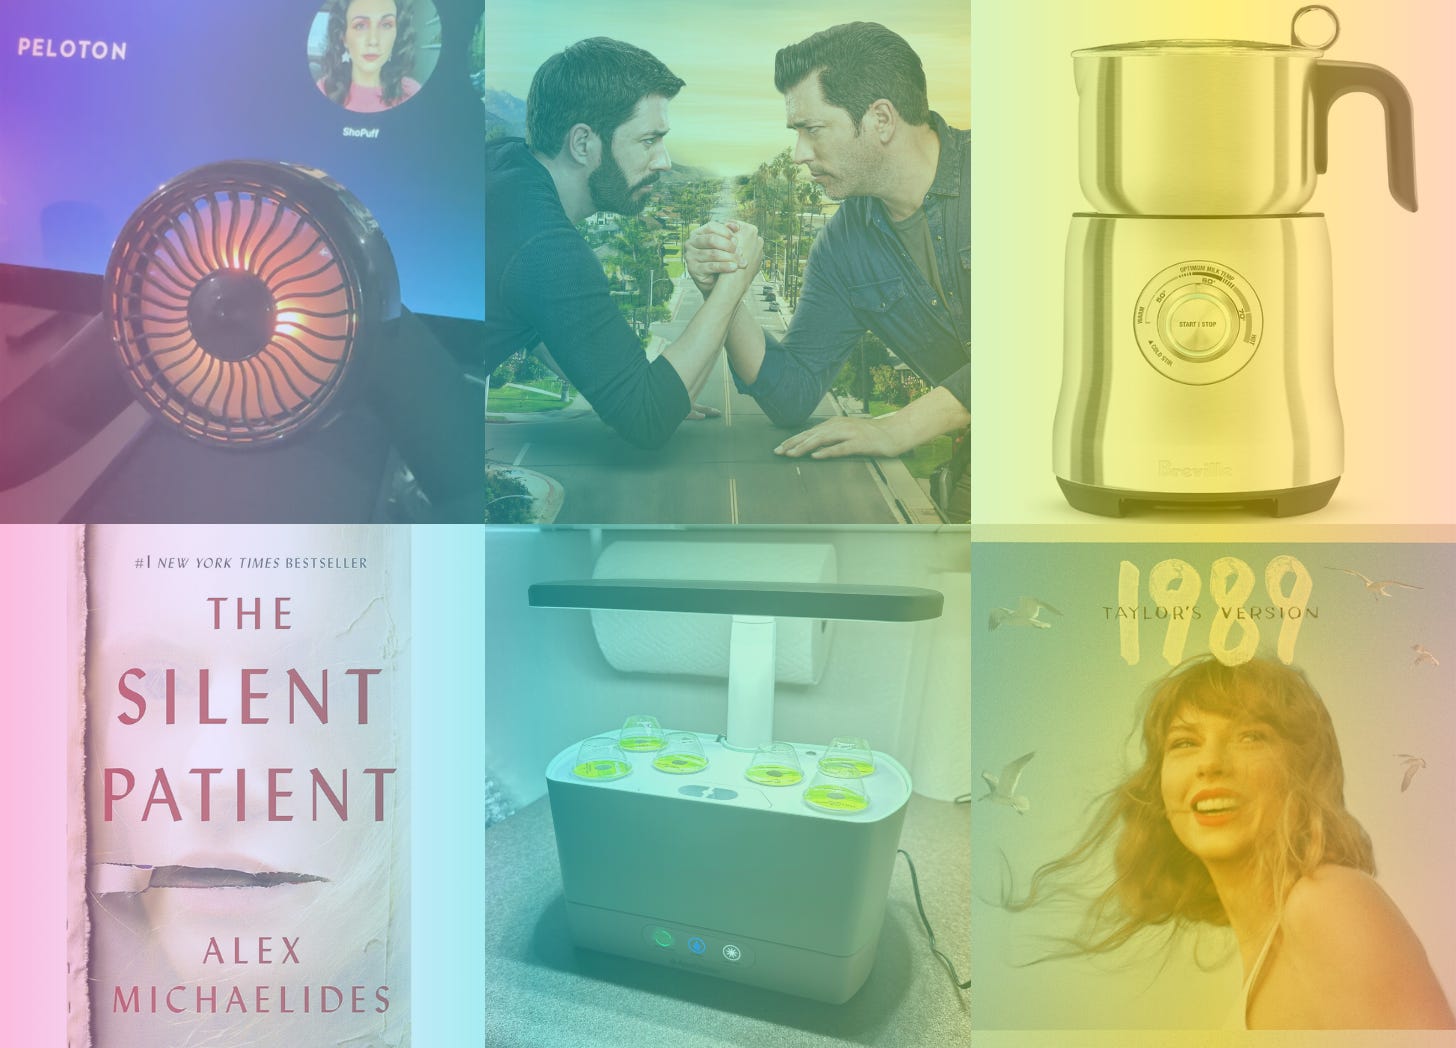 A grid of six images with a rainbow filter over them, including a photo of the colored fan on Shohreh's peloton, a promotional image from Brother vs Brother, a picture of the Breville Milk Cafe, the cover of The Silent Patient, a photo of Shohreh's AeroGarden, and the album artwork for 1989 (Taylor's Version)